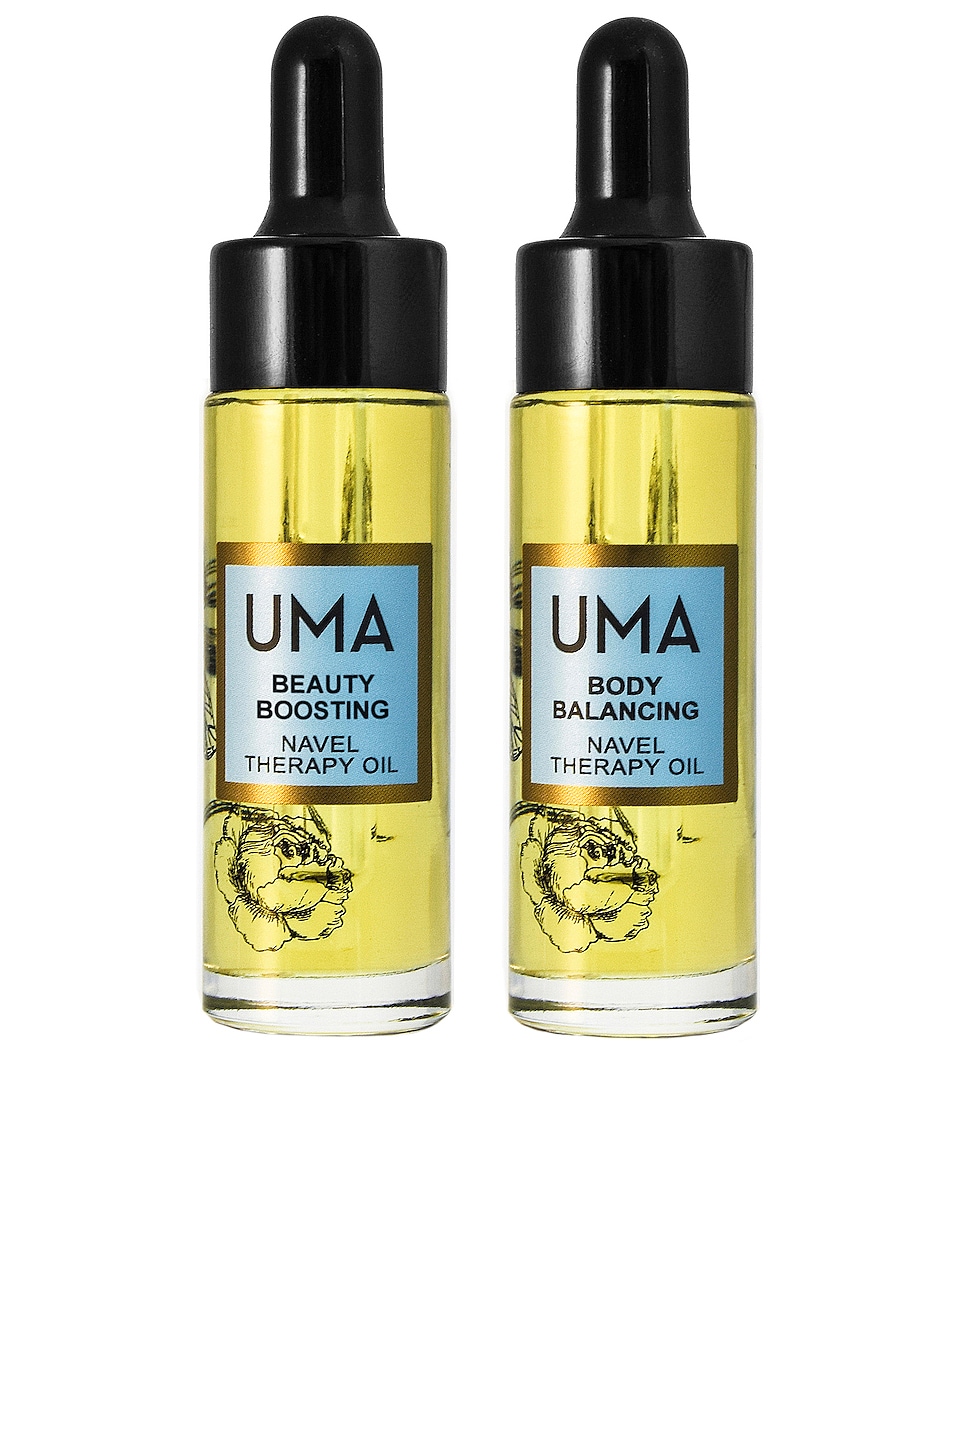 Uma Navel Therapy Oils Set In N,a